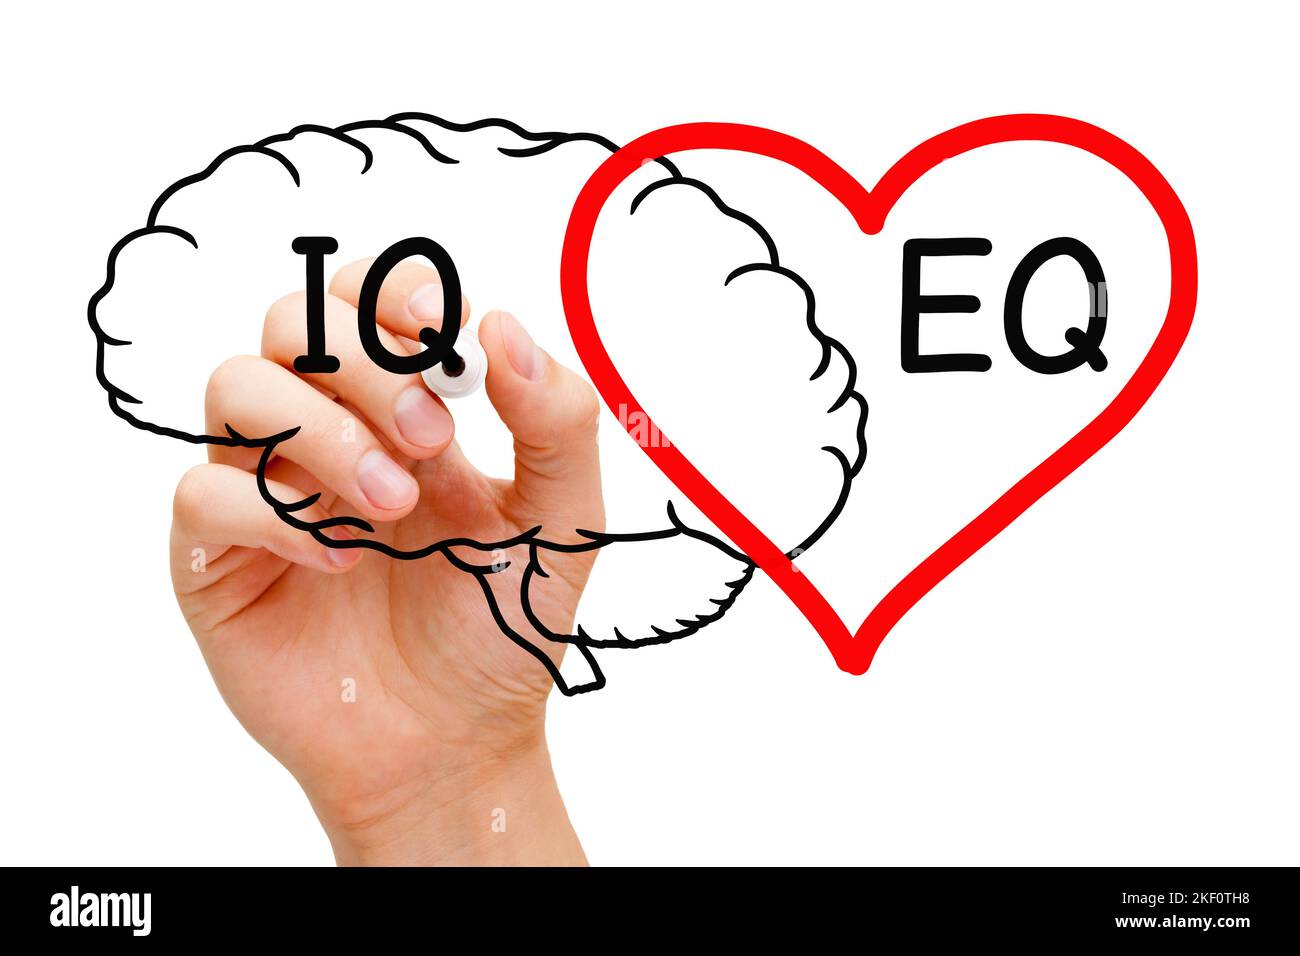 Hand drawing a brain and heart concept about the IQ intelligence quotient and EQ emotional intelligence. Stock Photo